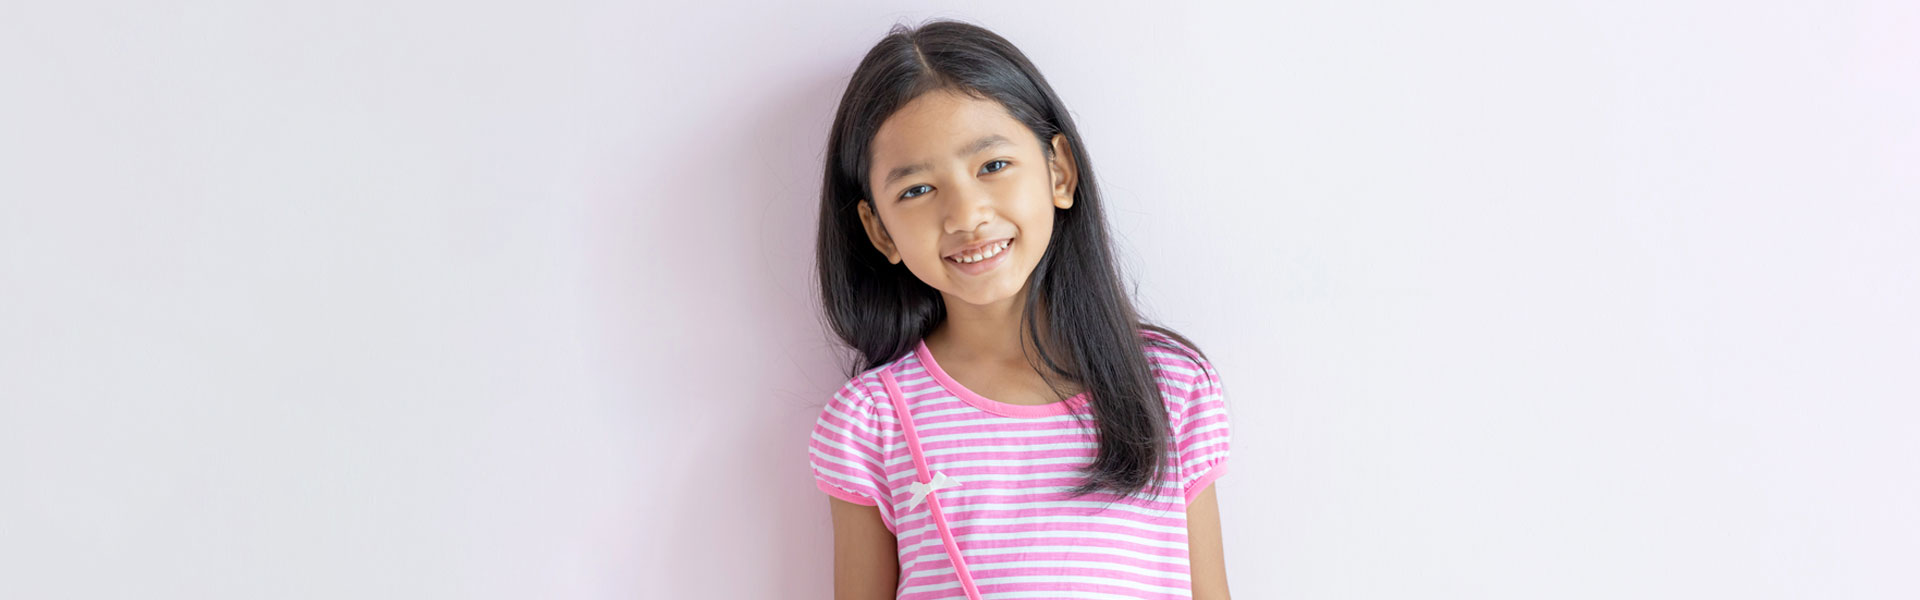 Children's Dentistry: What to Expect at Your Dental Appointment?